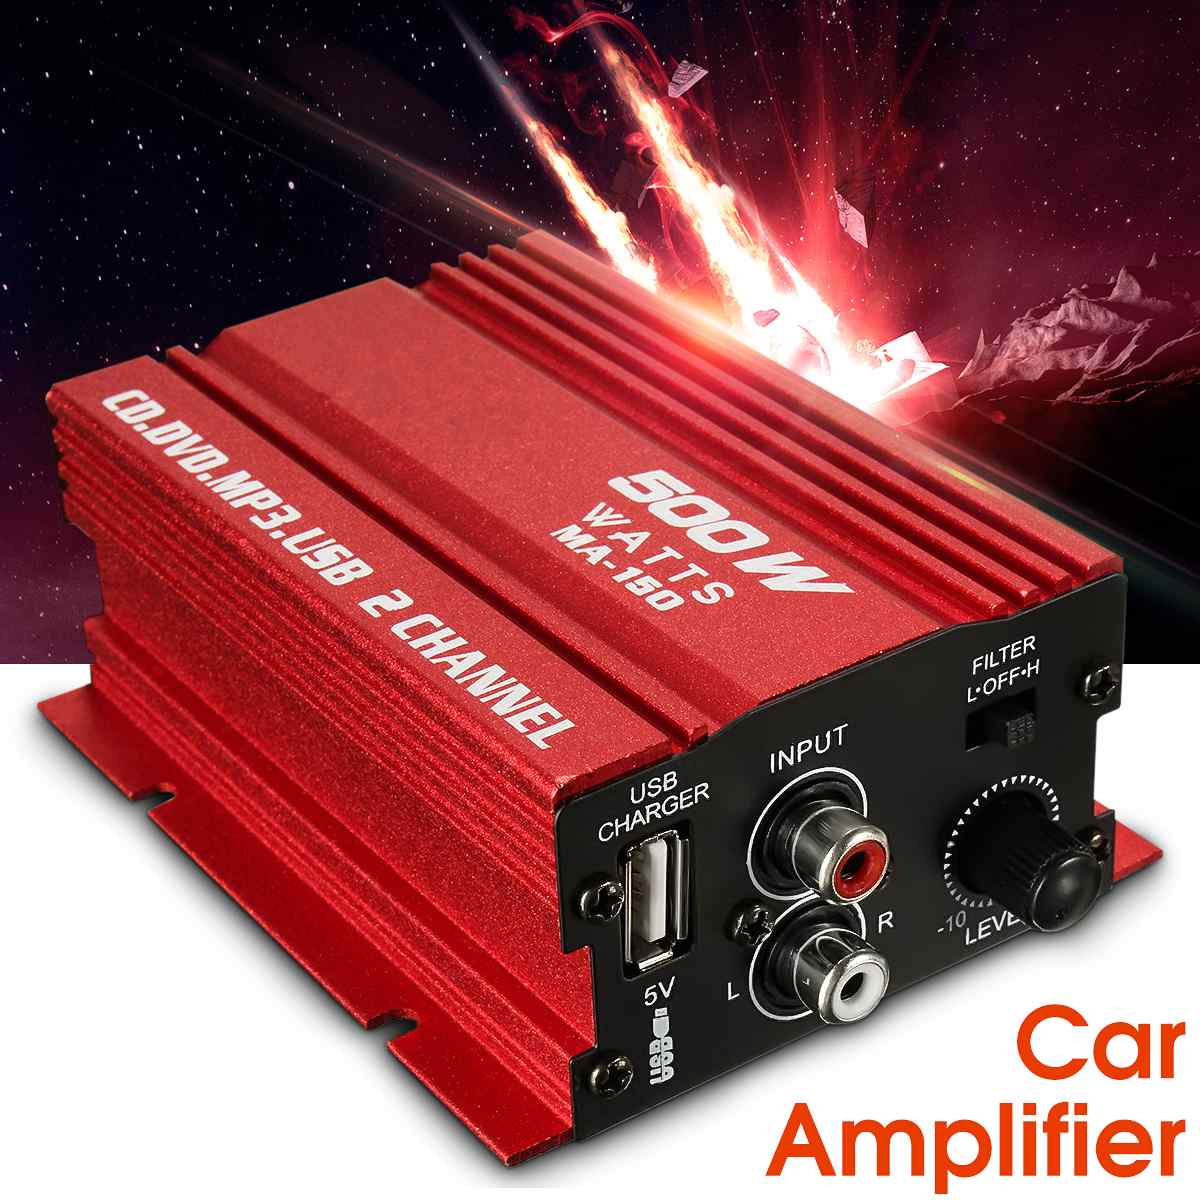 12V Mini 2CH HiFi Stereo Power Amplifier MP3 Audio Speaker with USB Car Subwoofer Car Audio Car Amplifier Amplifiers